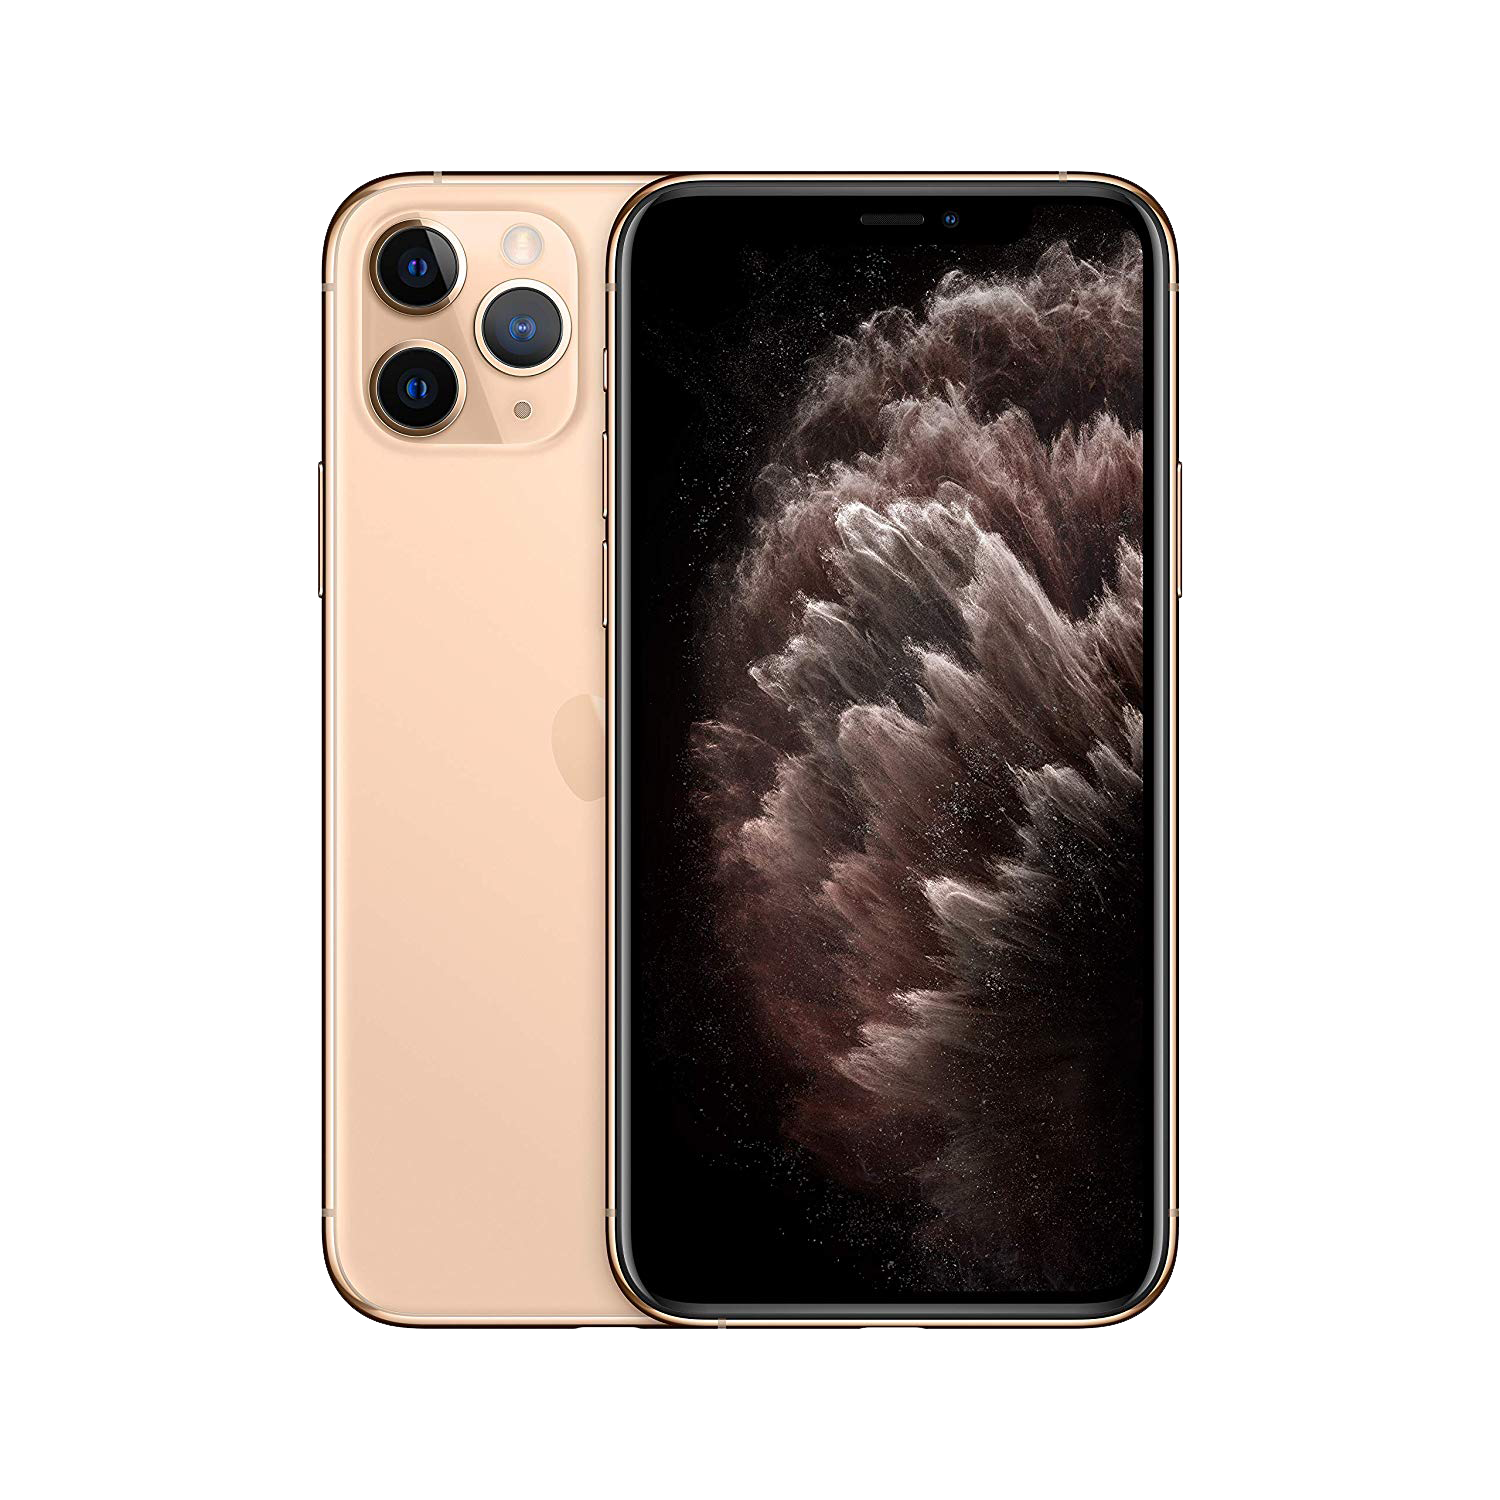 iPhone 11 vs. iPhone 11 Pro vs. iPhone 11 Pro Max Specs and Price in